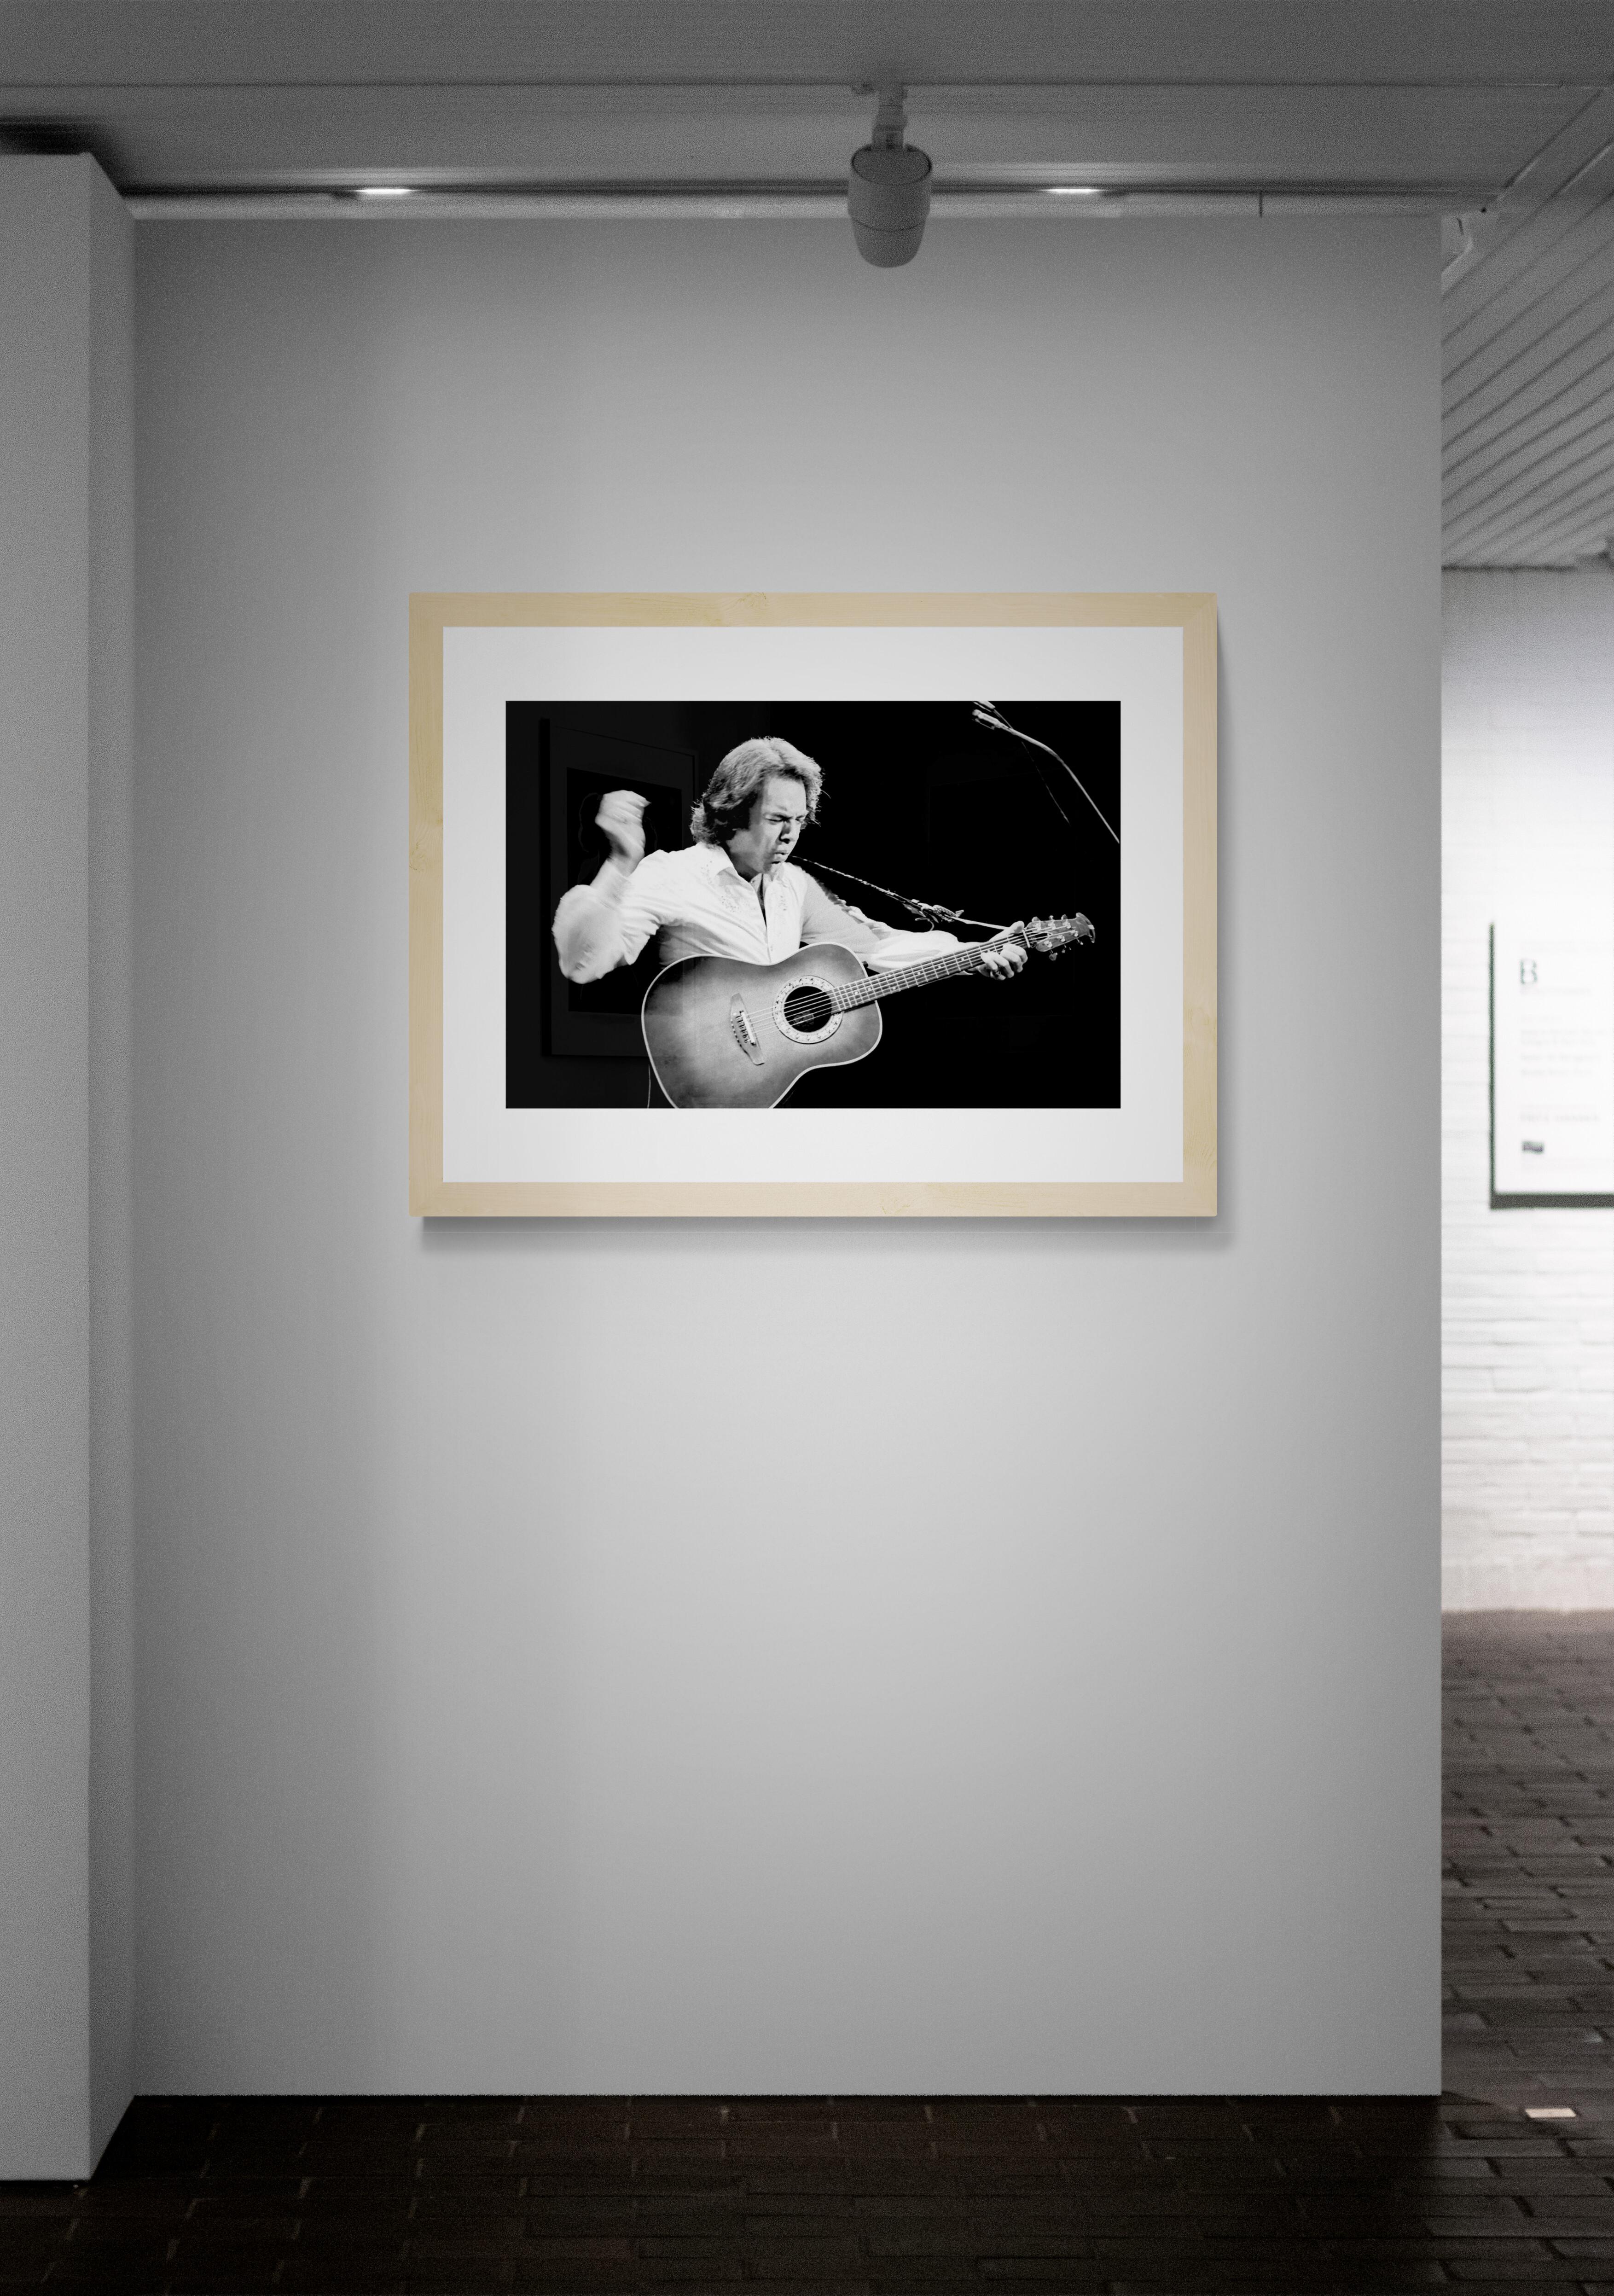 Title: Neil Diamond Concert Photo
Artist: Richard E. Aaron
Estate Edition: Hand numbered with estate chop mark in the margin, signature stamp on verso, archival pigment print on Hahnemühle Photo Rag Pearl, 100% cotton paper fine art paper.